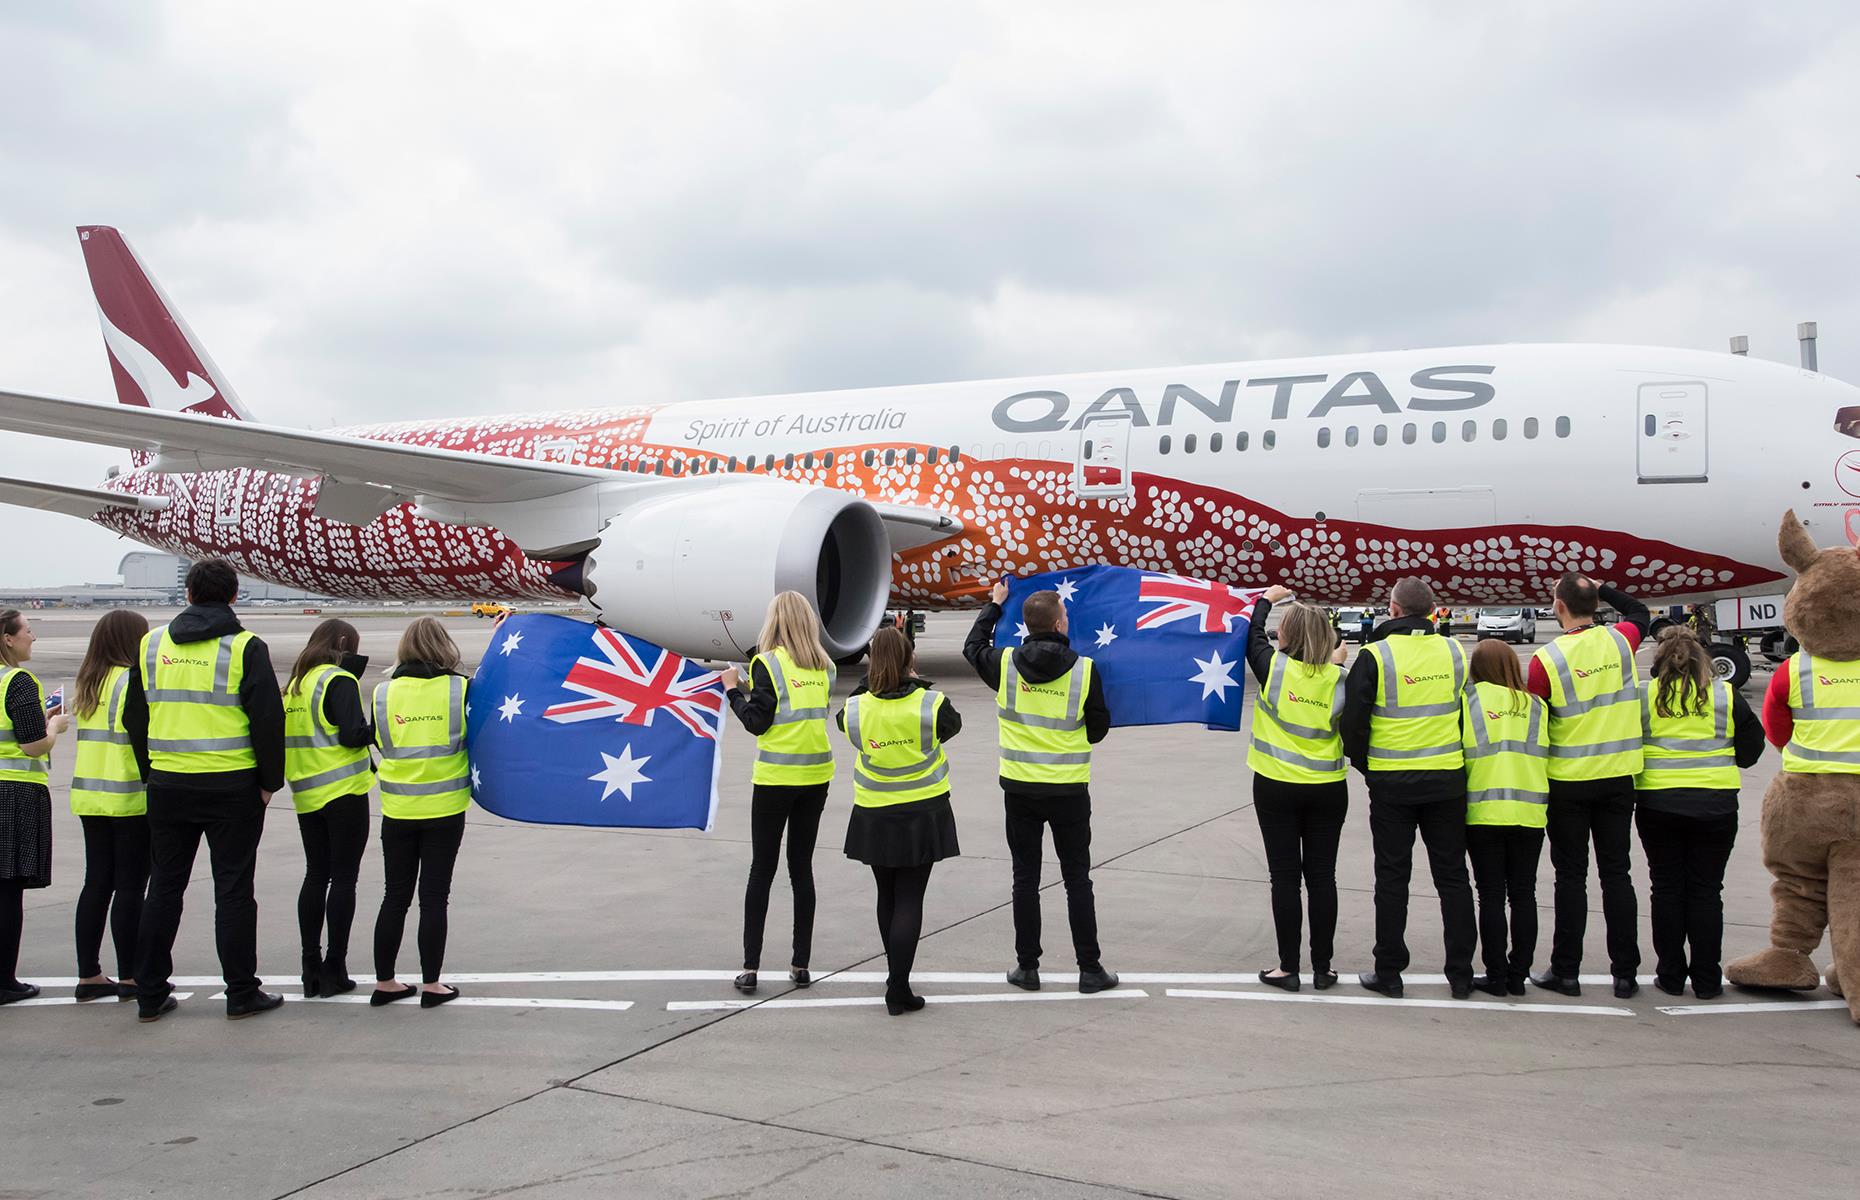 Australia’s flagship airline, Qantas, is another company that’s making the world that bit smaller. The carrier’s Project Sunrise is focused on ultra-long-haul routes, joining up the east coast of Oz with world destinations including London and New York. This follows the 2019 launch of direct flights from London to Perth, with a journey time of around 17 hours (the first flight is pictured here).